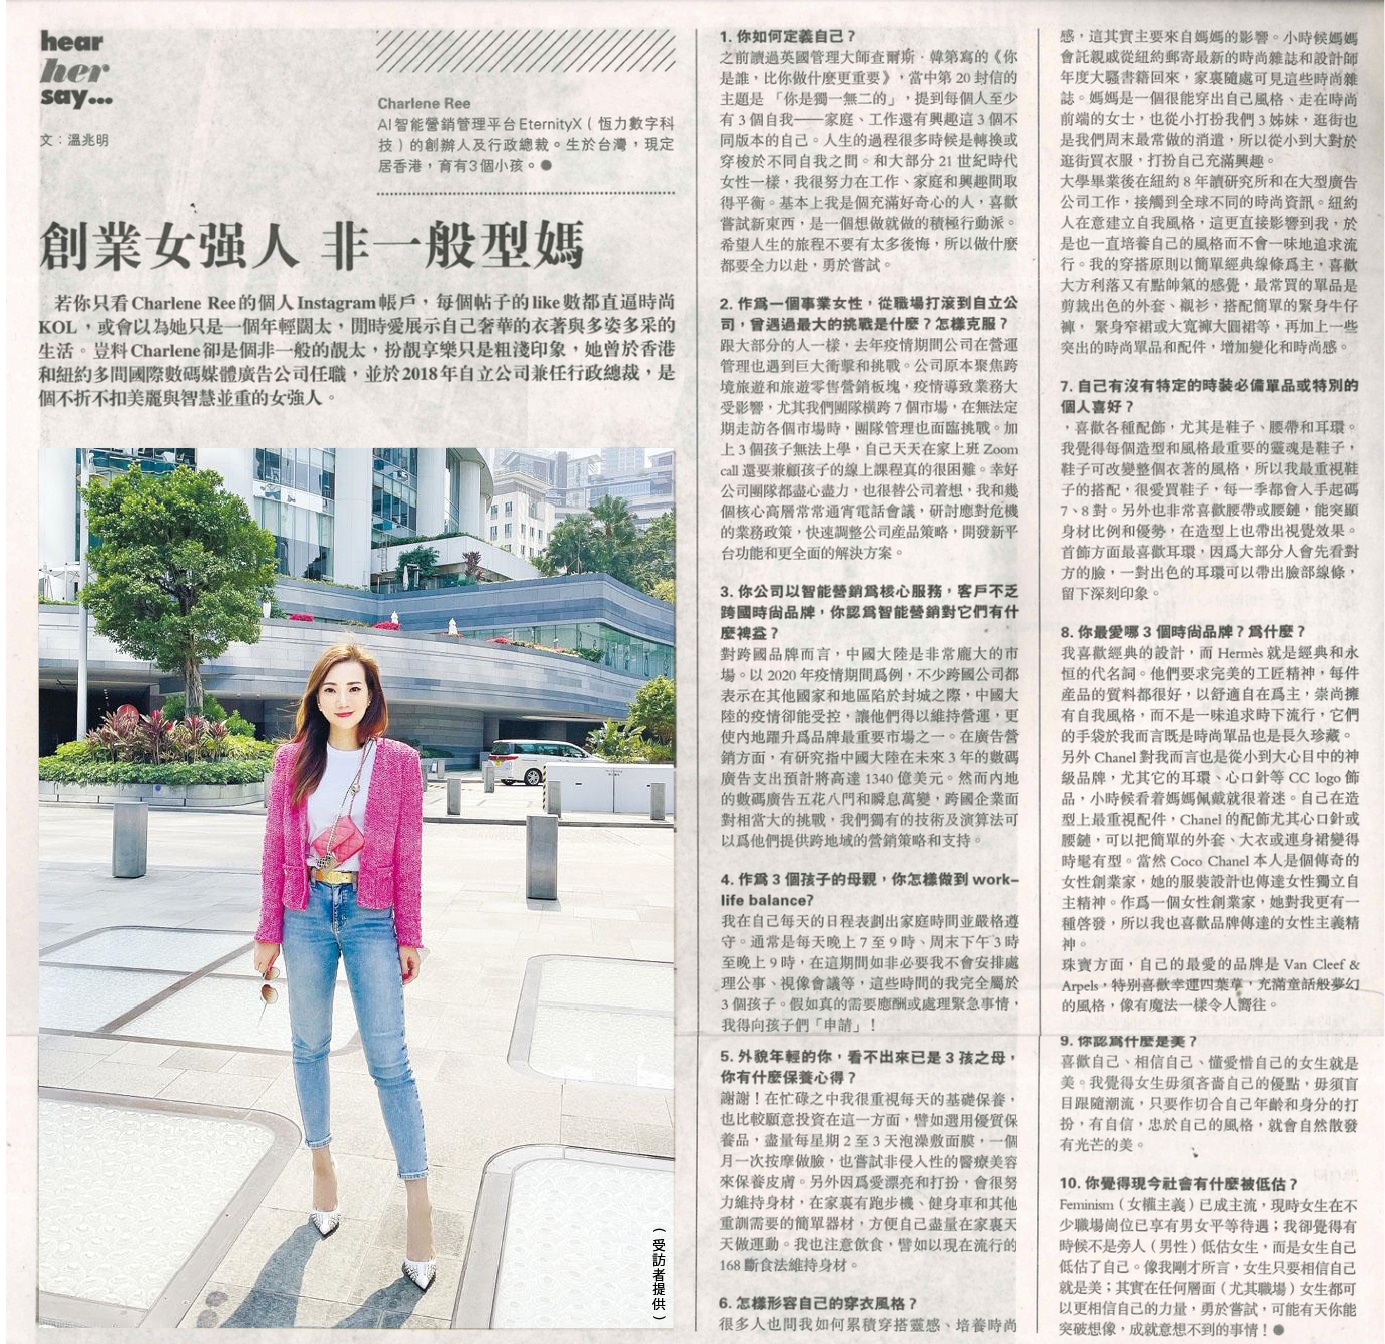 A Momtrepreneur, who is Living in Style, Reported by Ming Pao